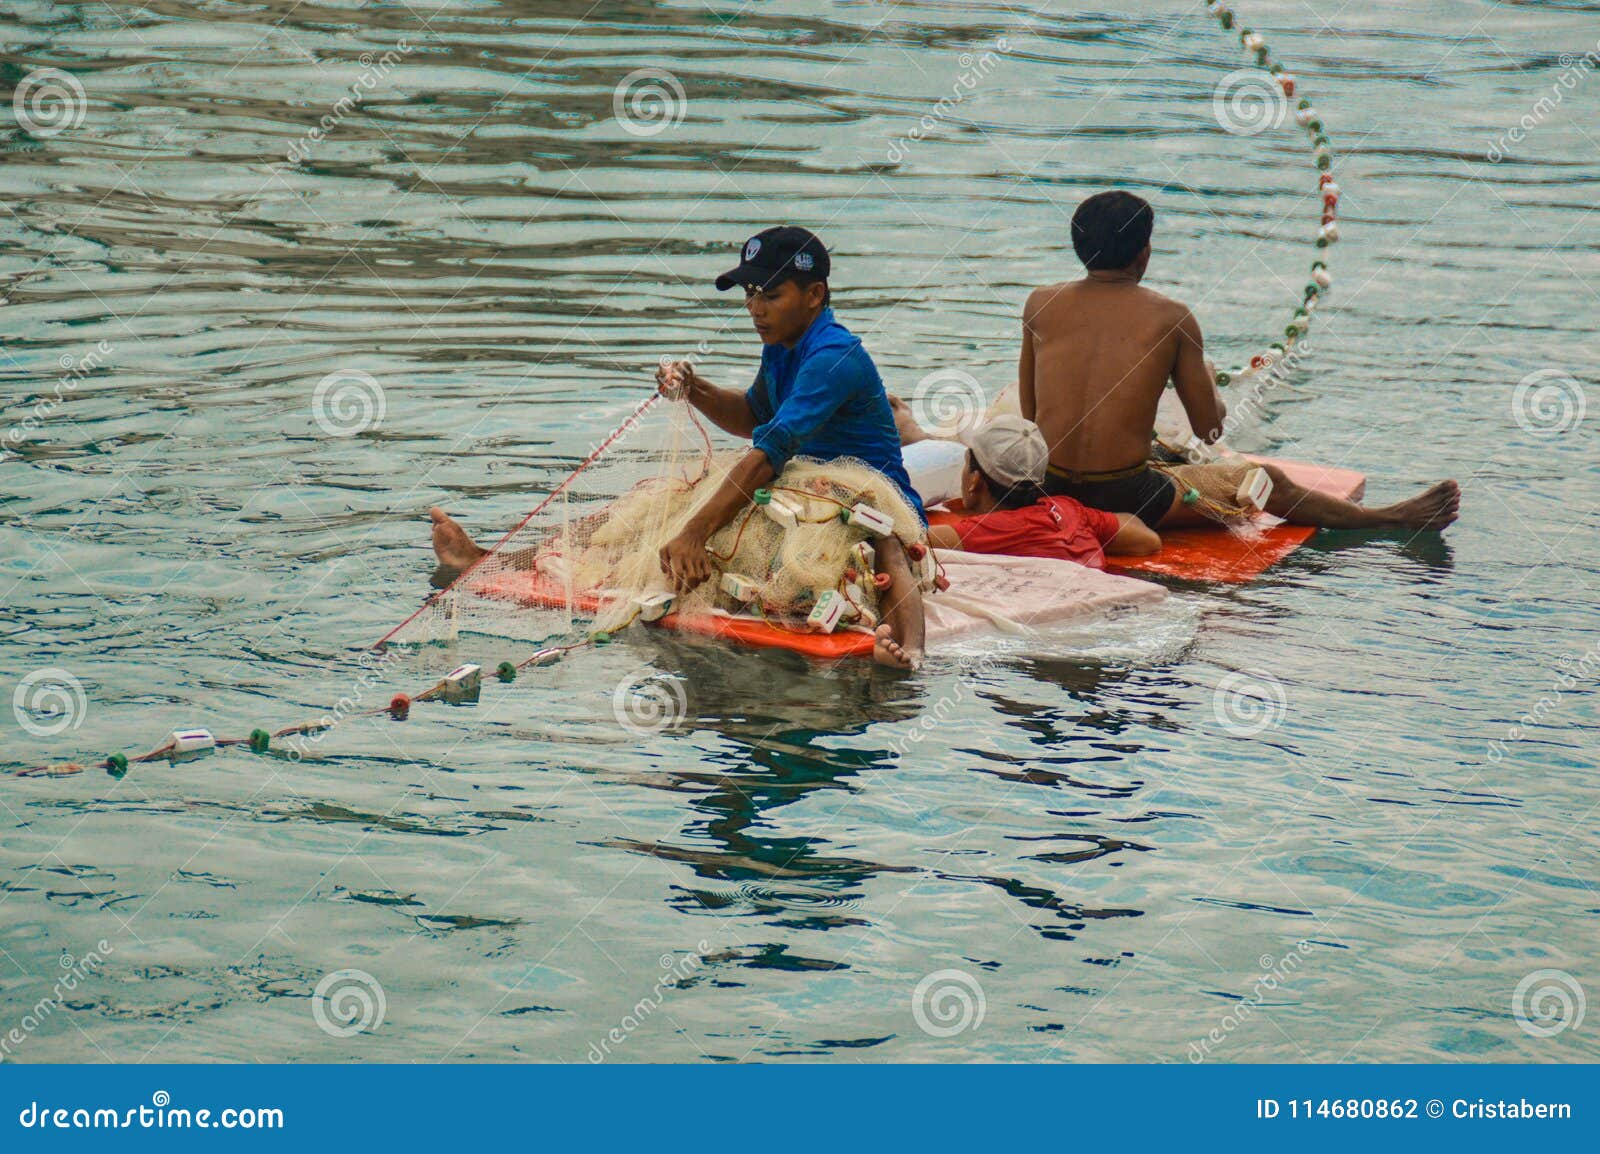 Cambodian Fishing Technique Editorial Photography - Image of outside,  floating: 114680862